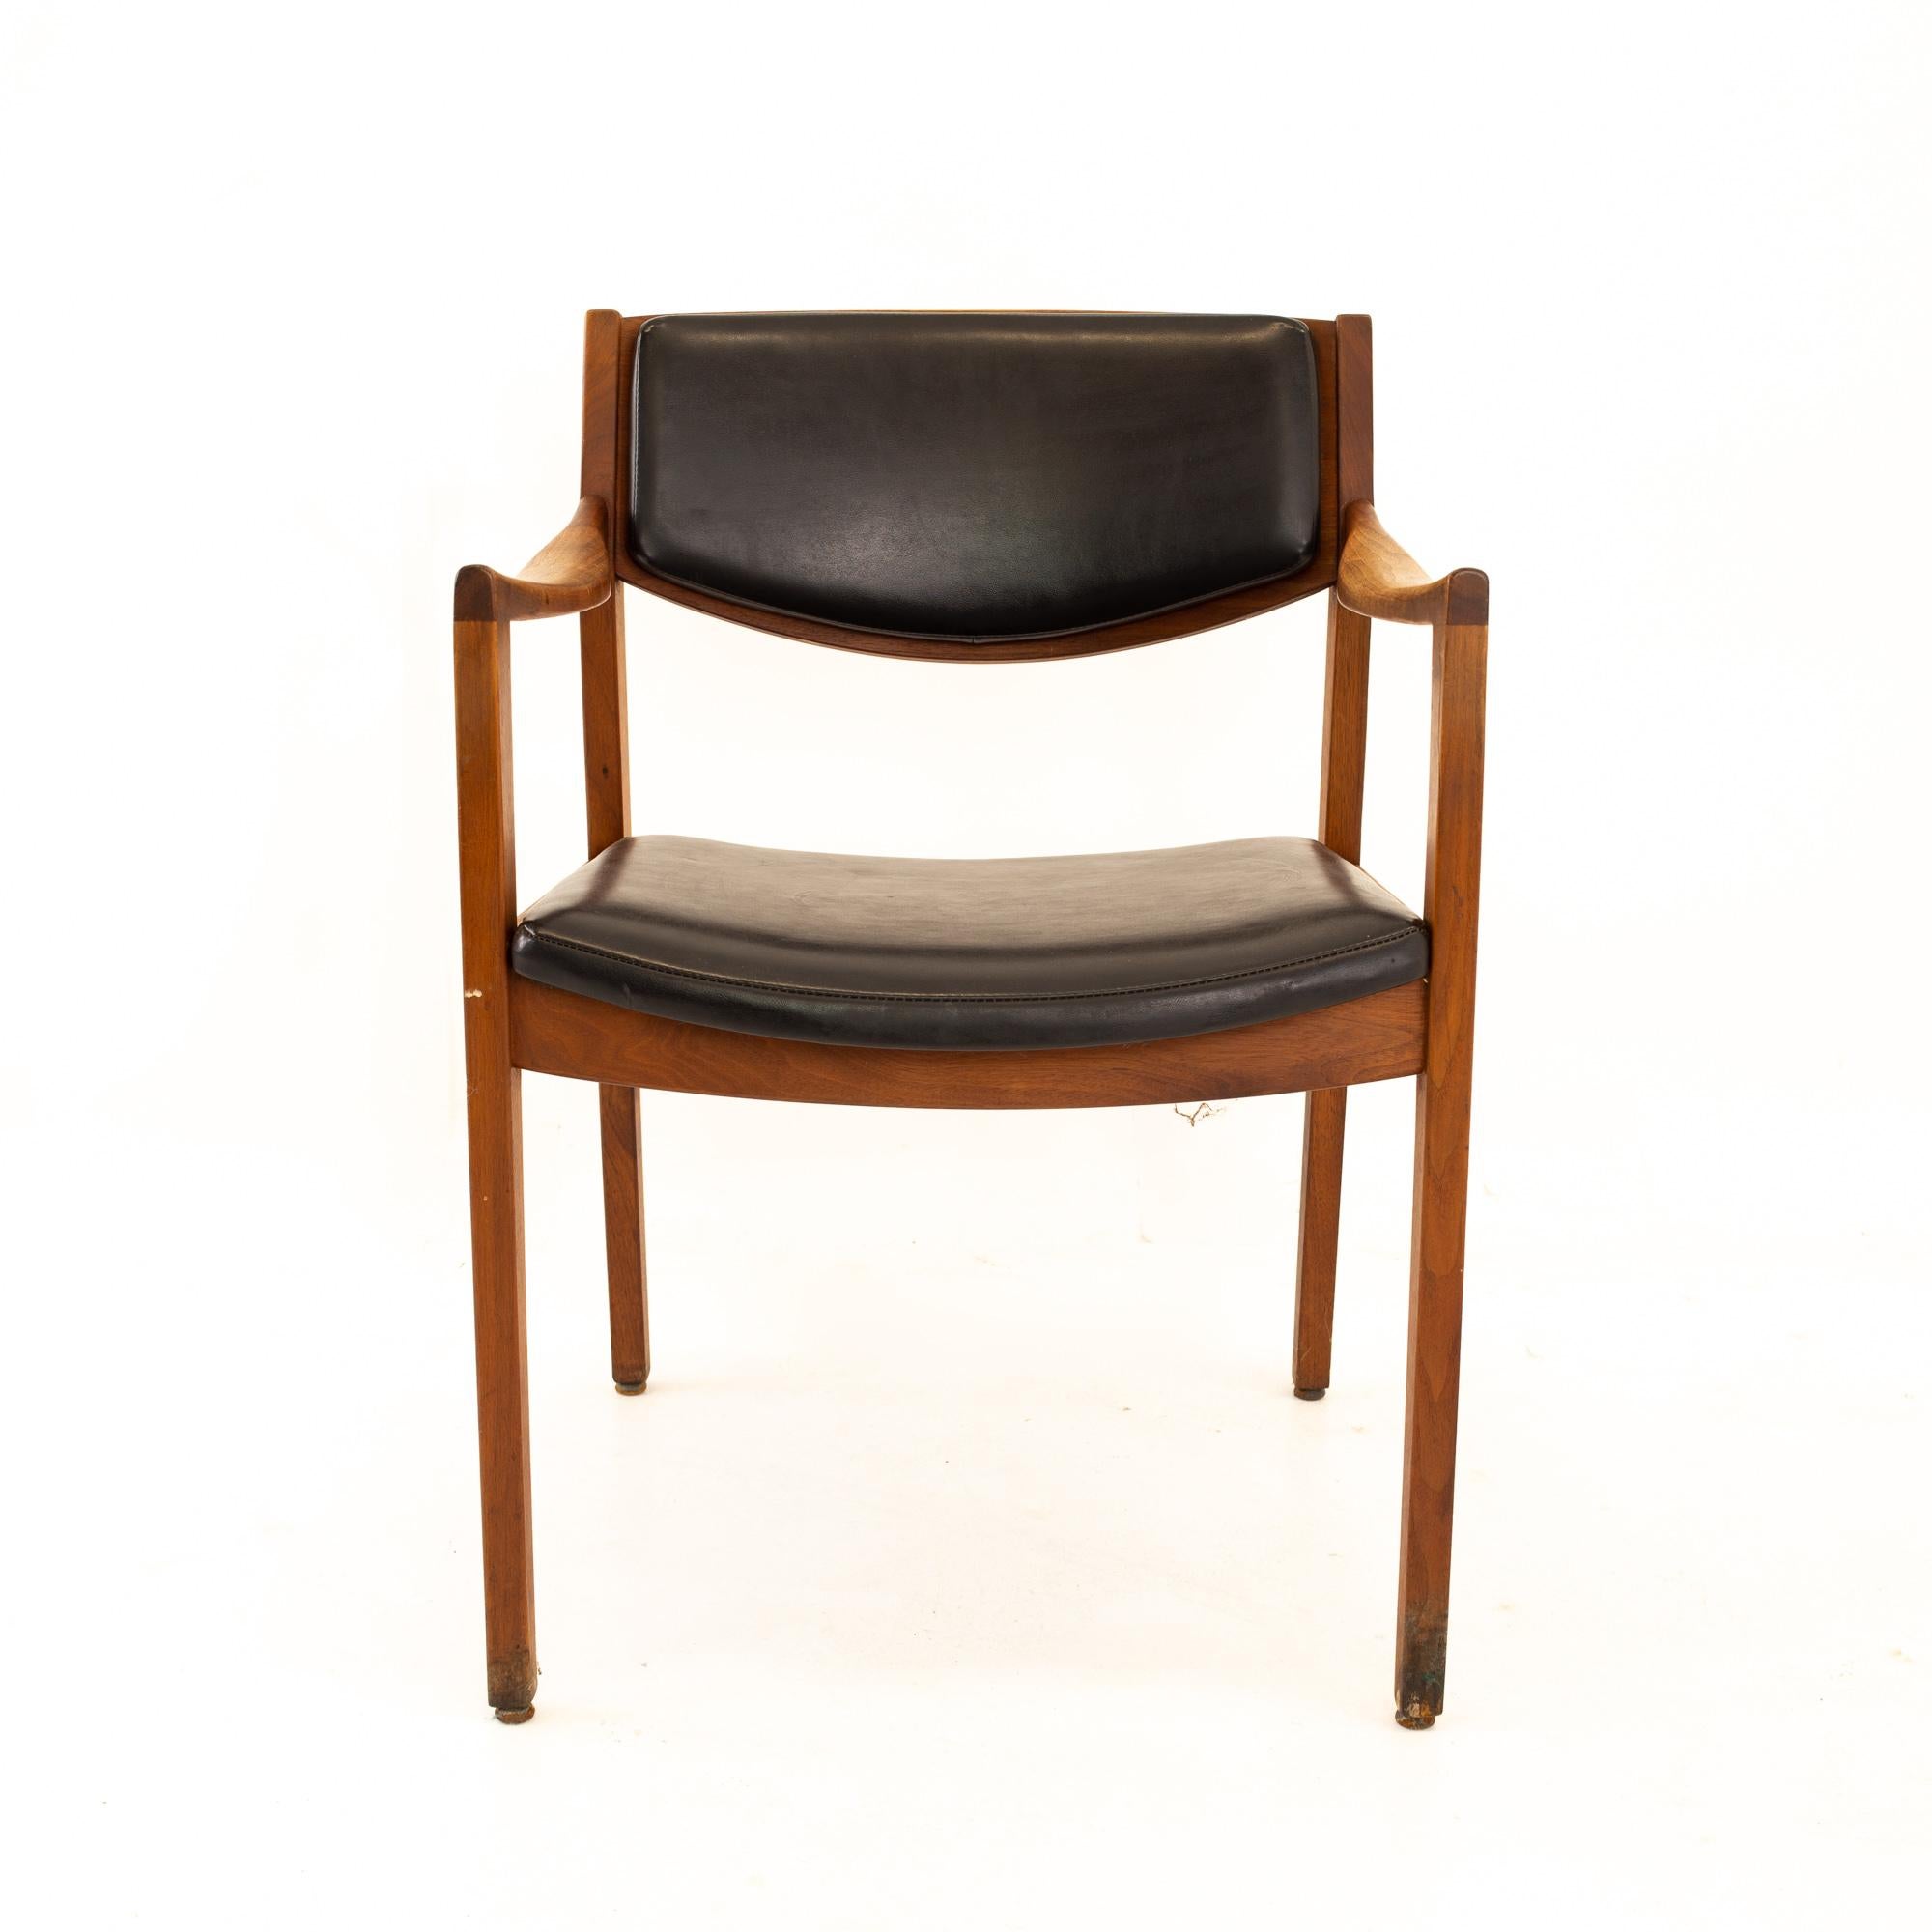 American Gunlocke Midcentury Walnut and Black Leather Occassional Chairs, Pair